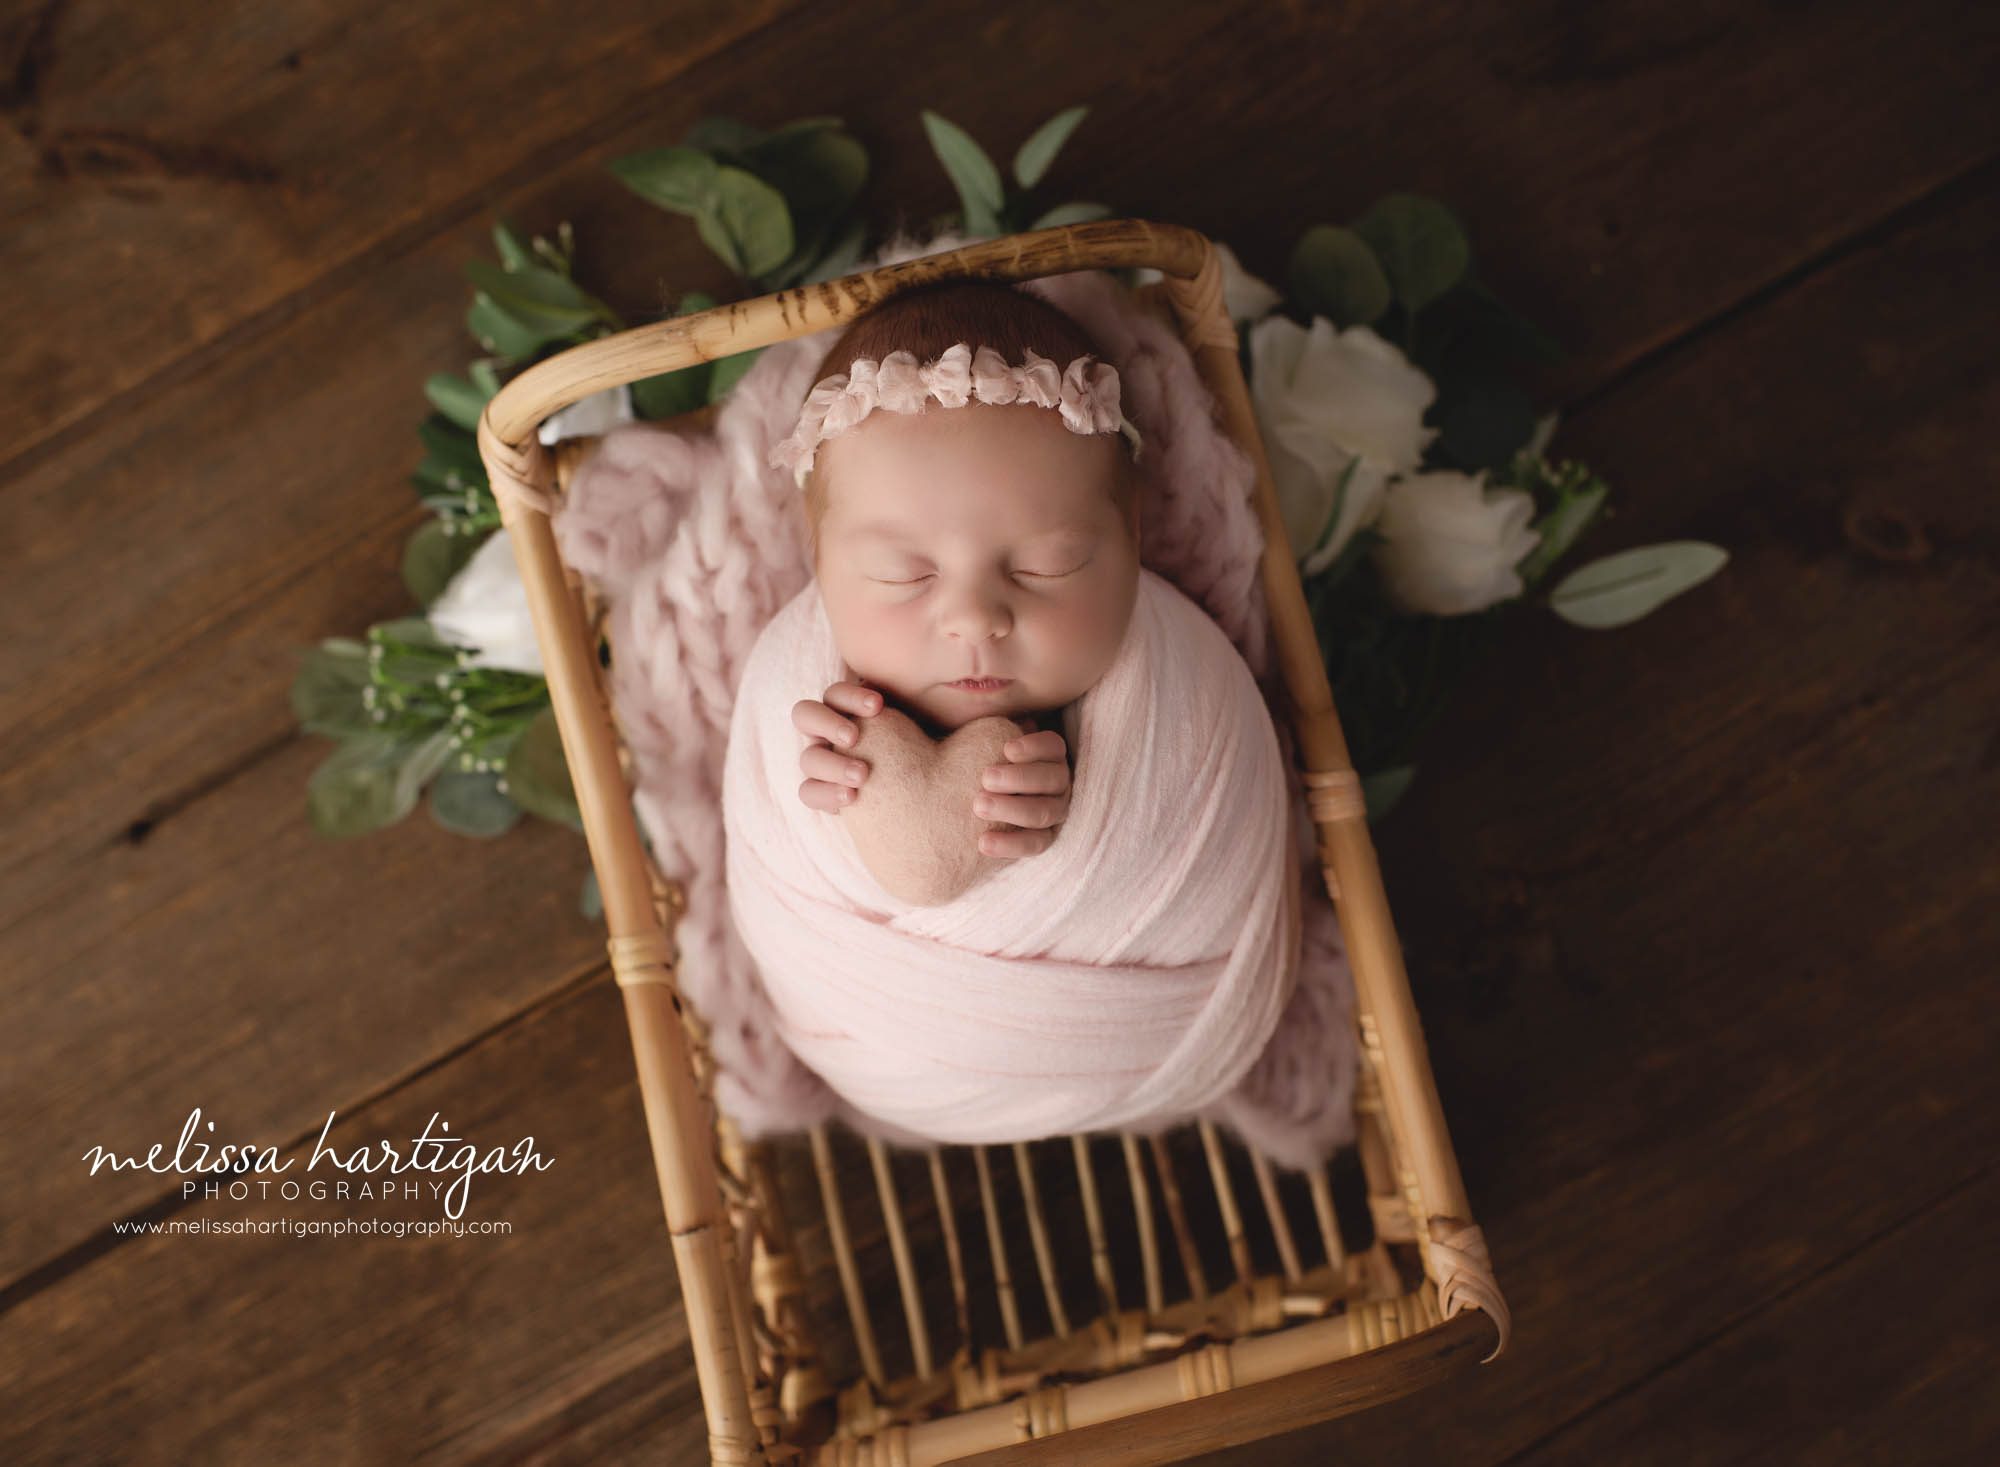 newborn baby girl wrapped in pink wrap posed in basket holding felted heart prop